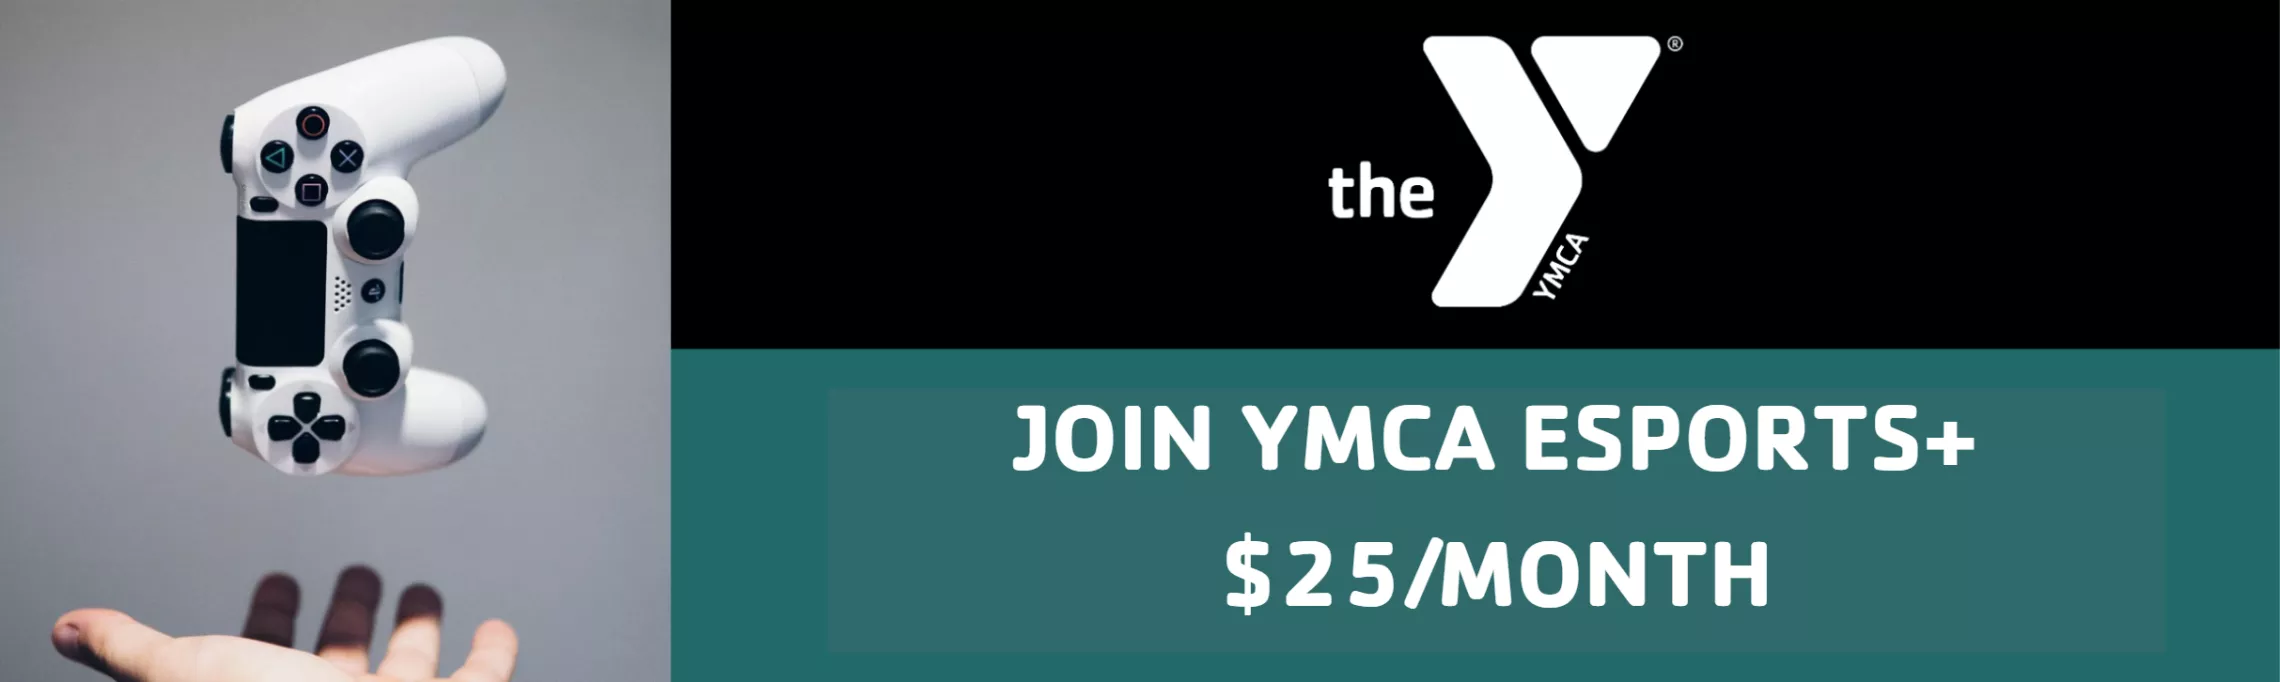 Join YMCA Esports+ $25/Month